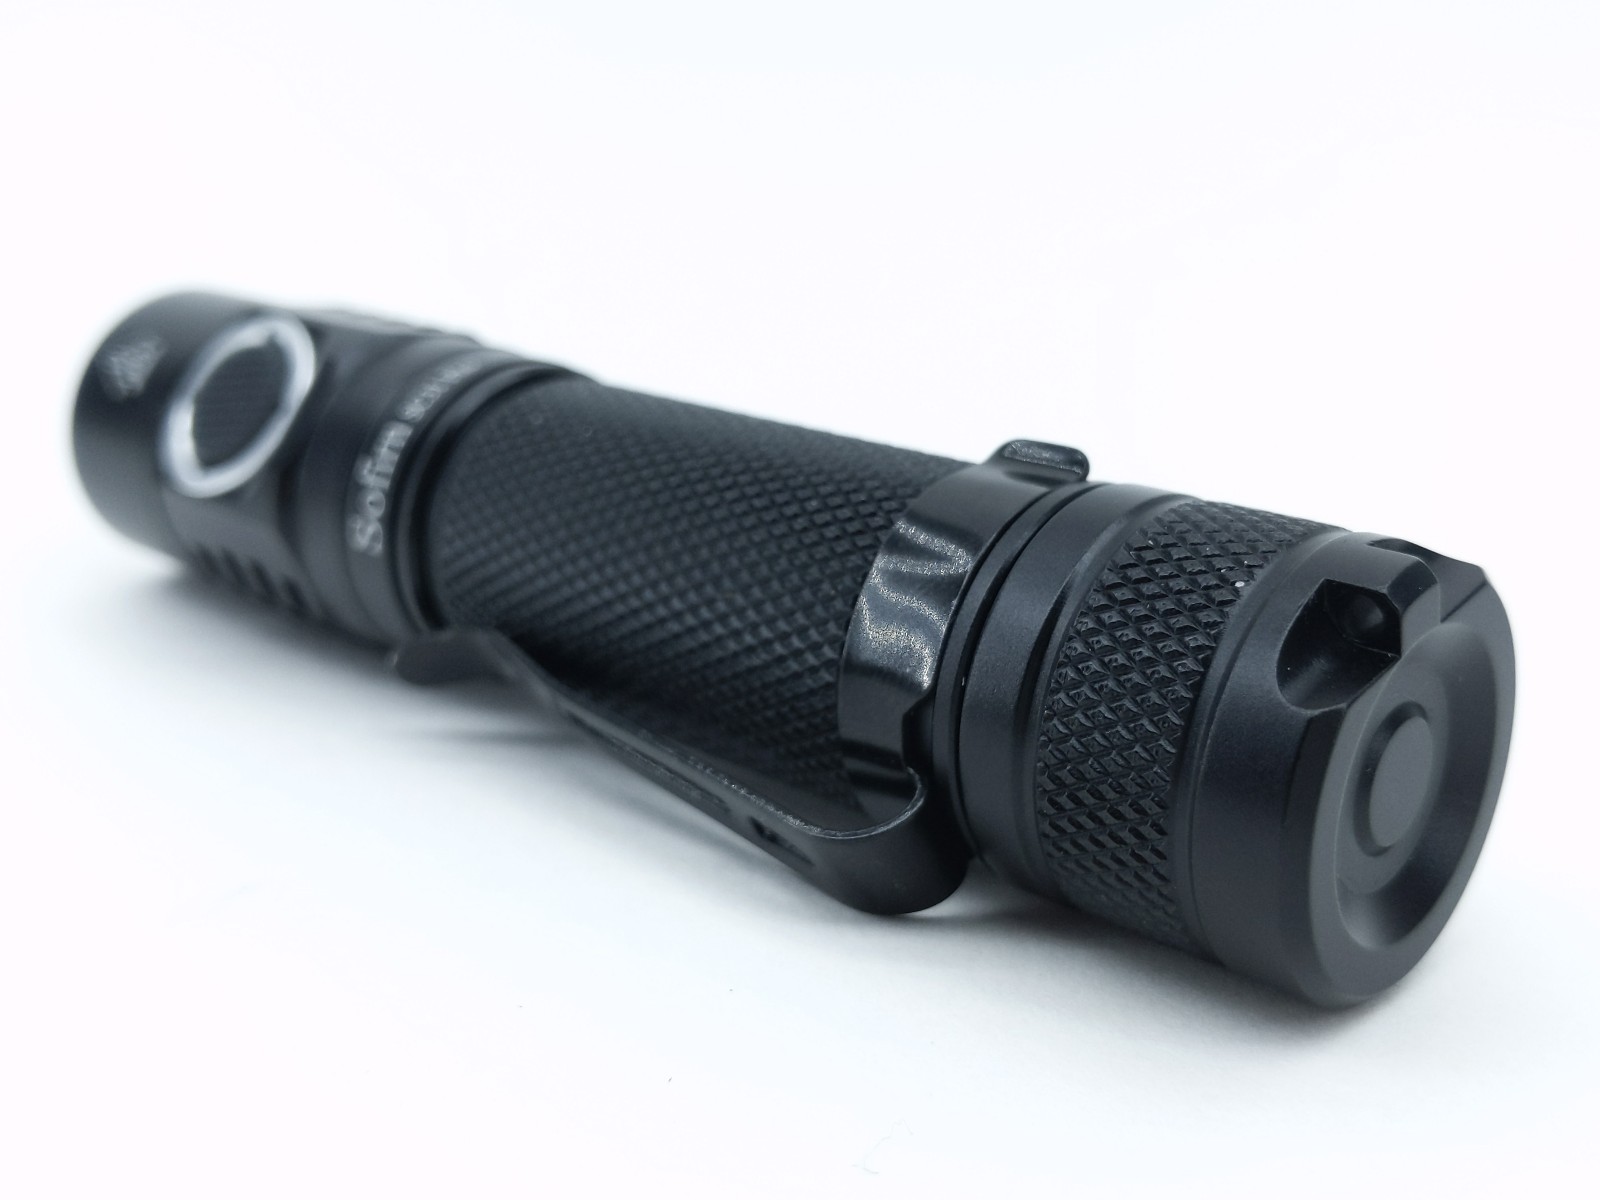 [Review] Sofirn SC31 Pro - now with Anduril & USB-C - 18650 Flashlights ...